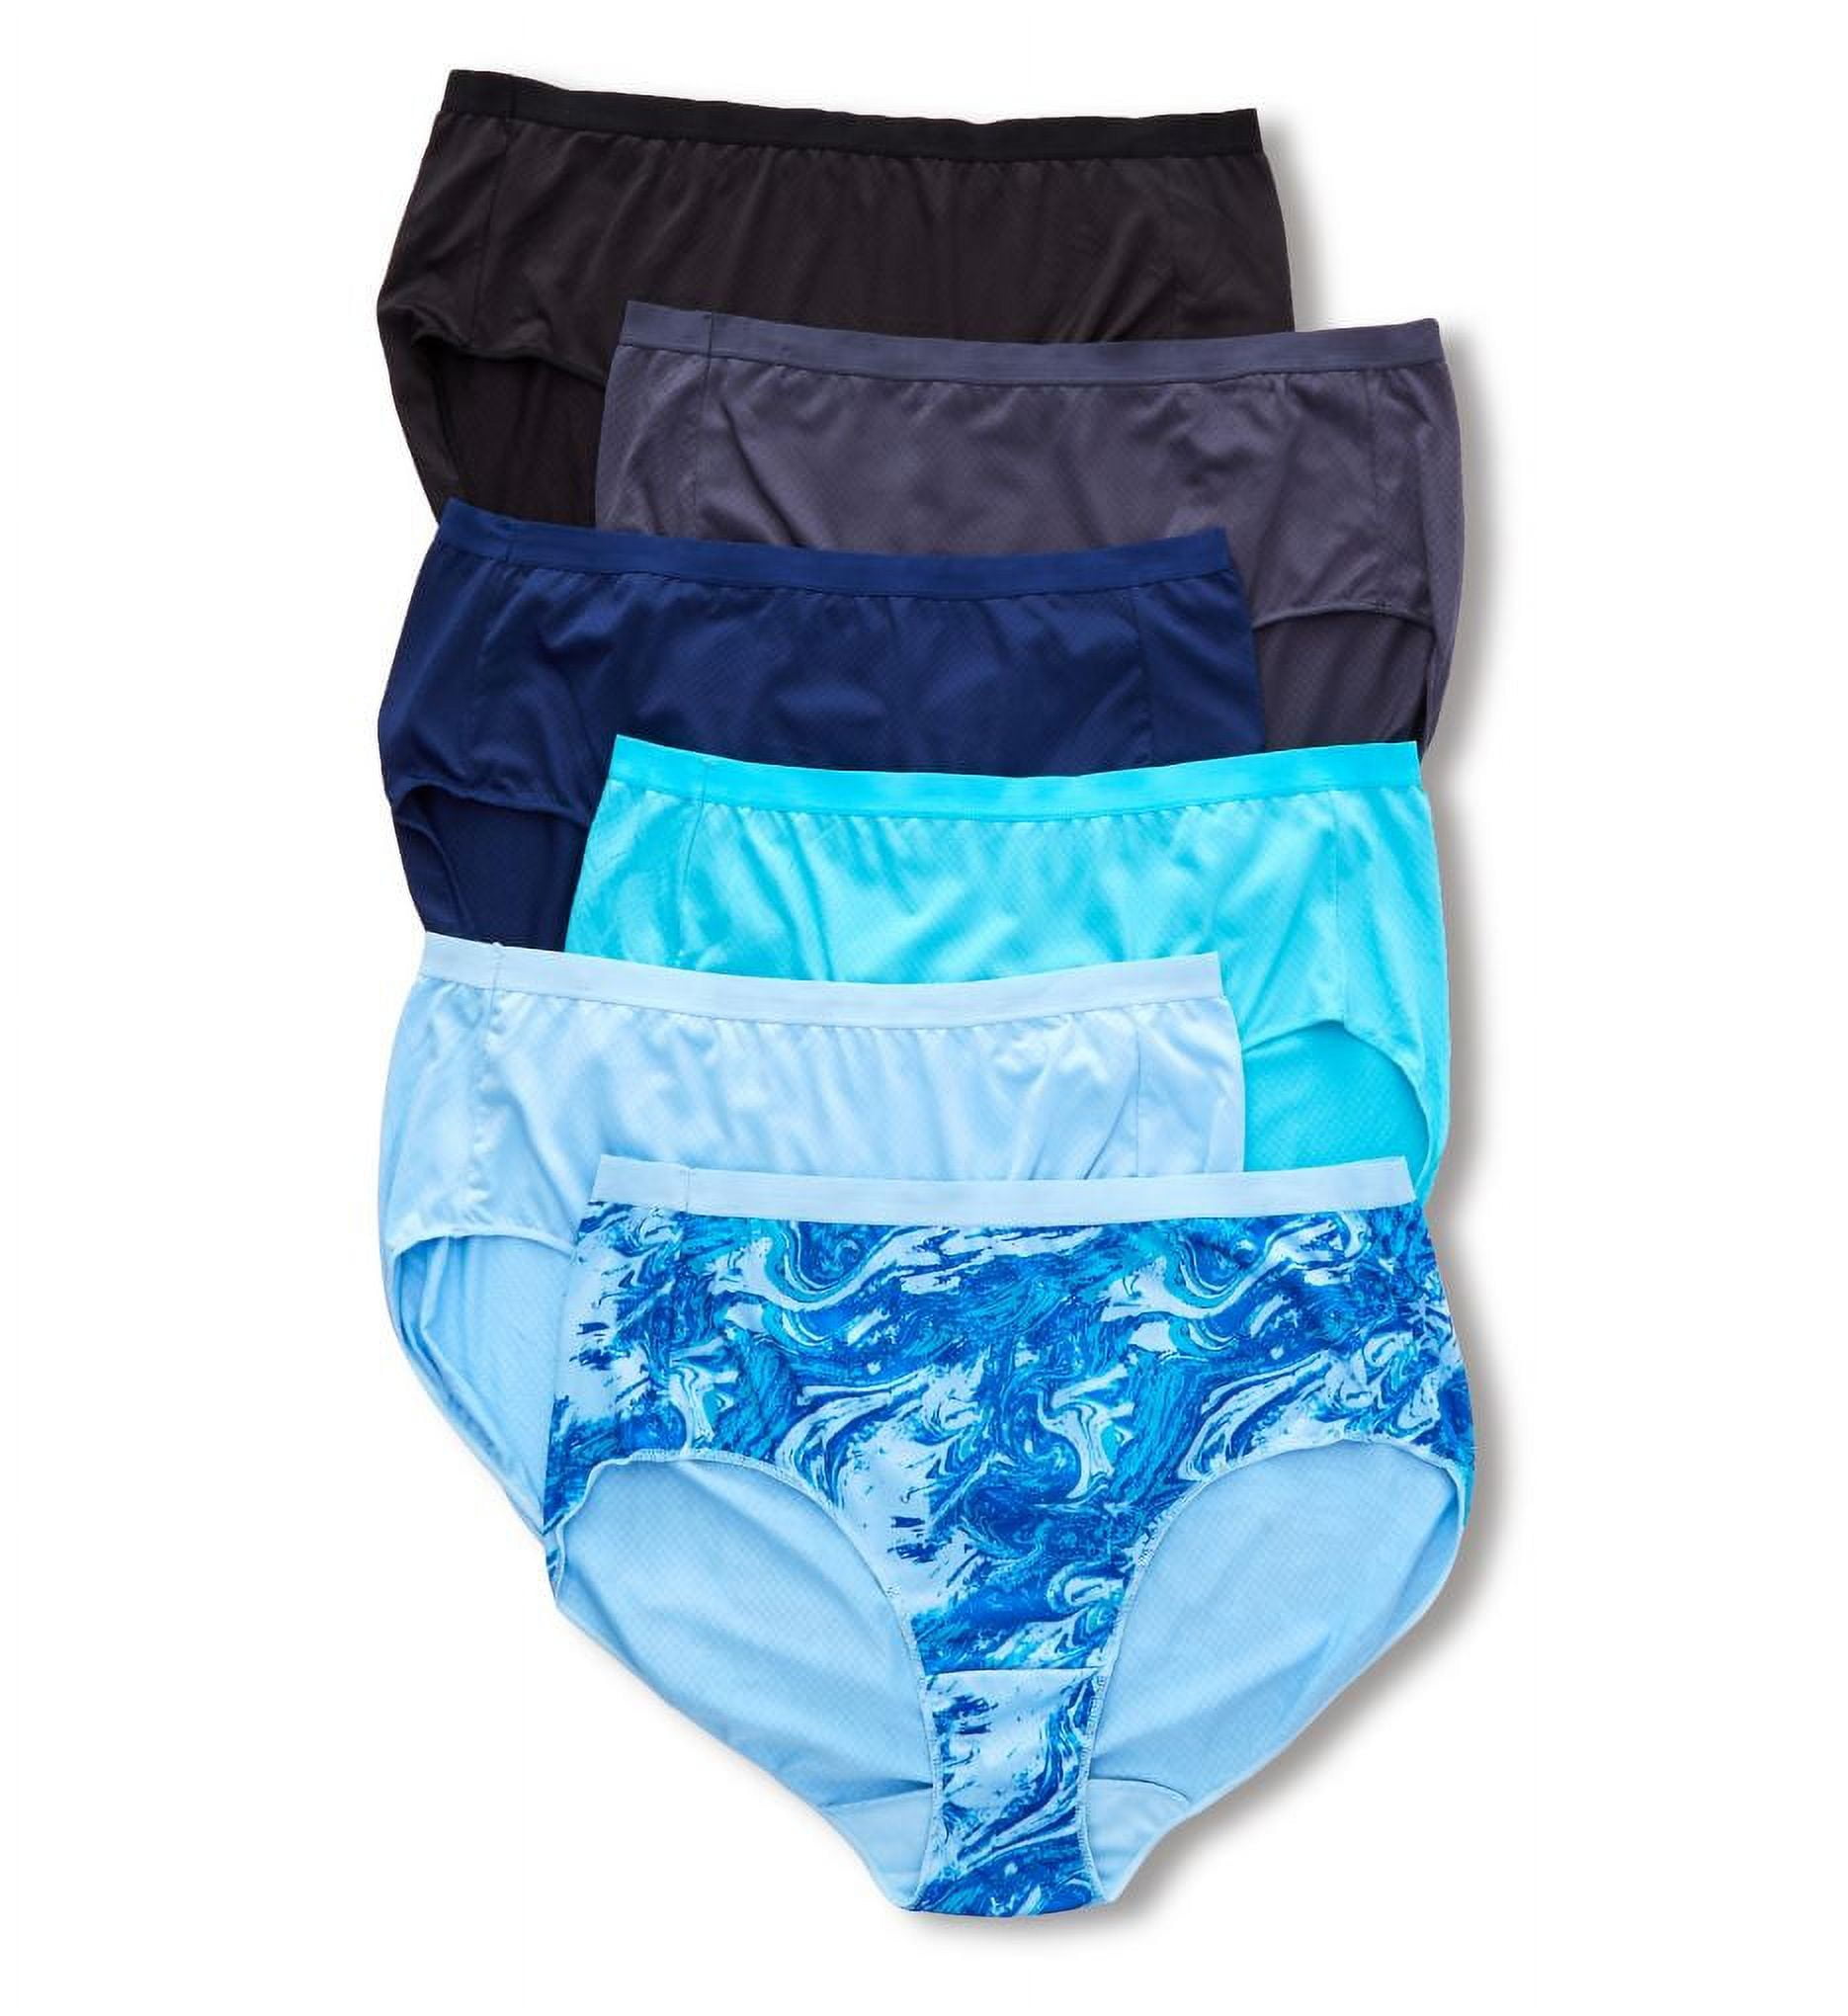 JUST MY SIZE Women's Plus Size Microfiber Brief 6-Pack, Assorted